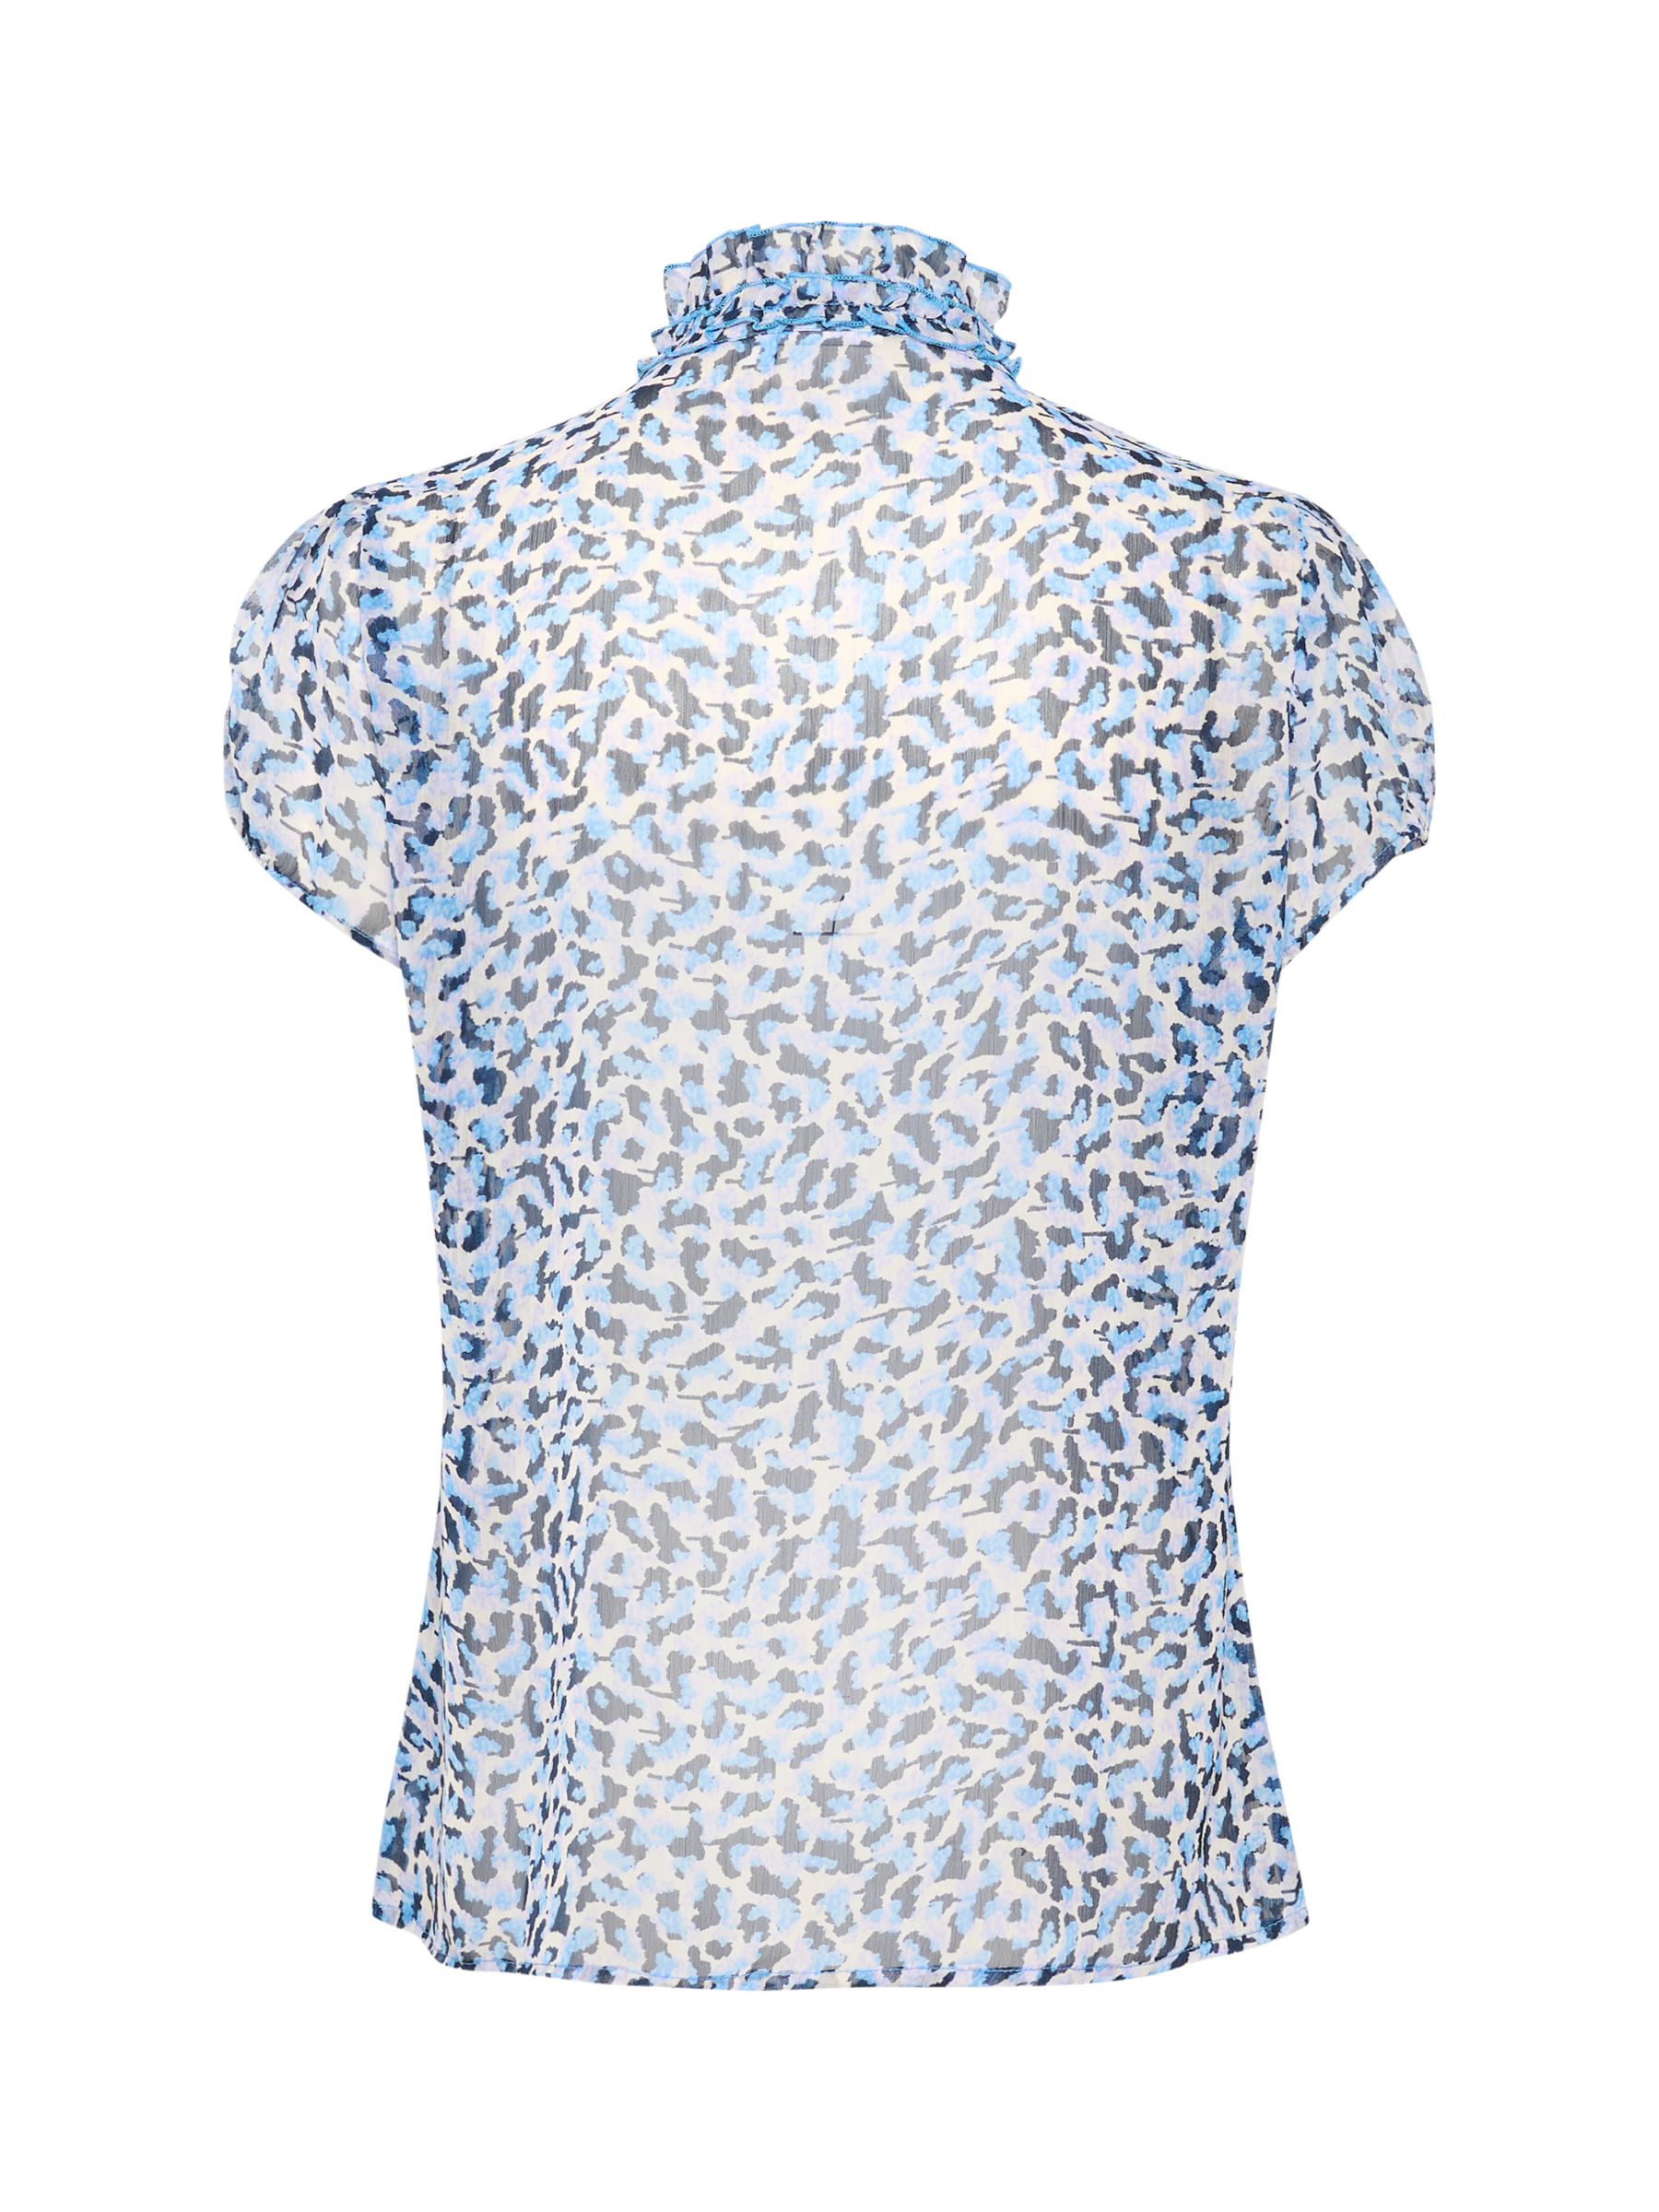 Buy Saint Tropez Lilja Crinkle Abstract Print Blouse, Palace Blue Skyes Online at johnlewis.com